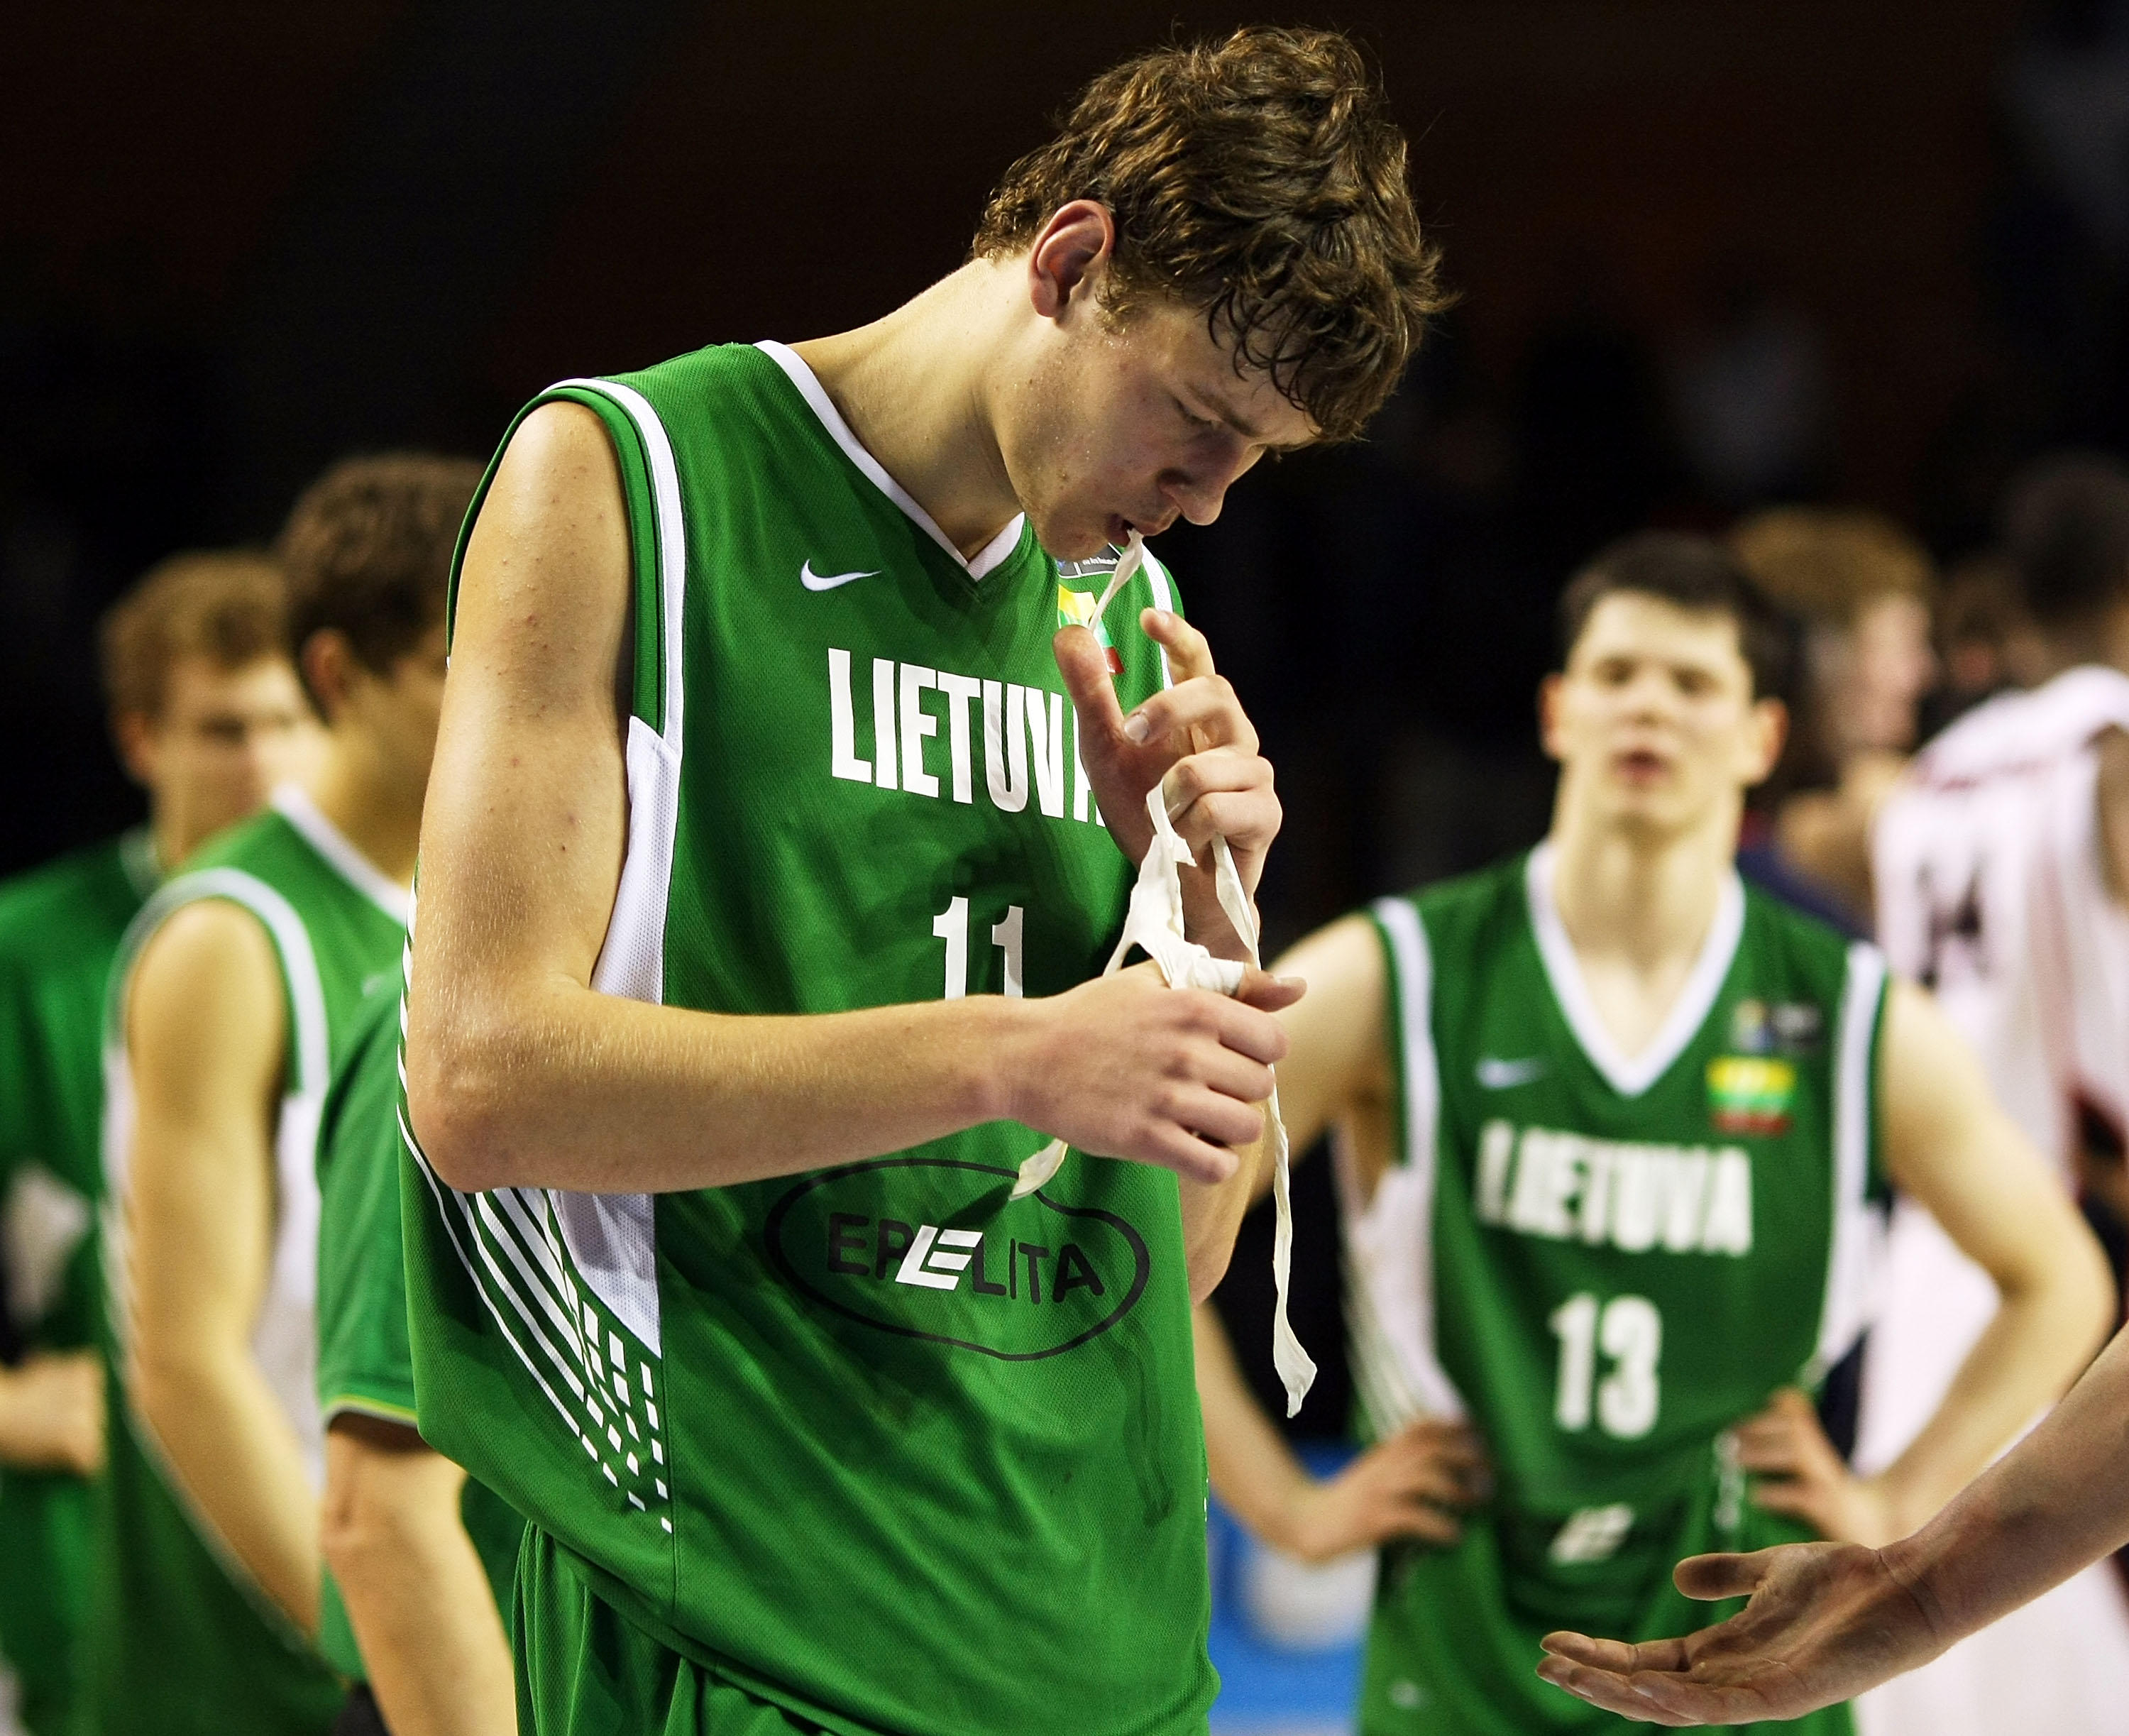 AUCKLAND, NEW ZEALAND - JULY 08:  Donatas Motiejunas of Lithuania walks off after losing the U19 Basketball World Championships match between the United States and Lithuania at North Shore Events Centre on July 8, 2009 in Auckland, New Zealand.  (Photo by